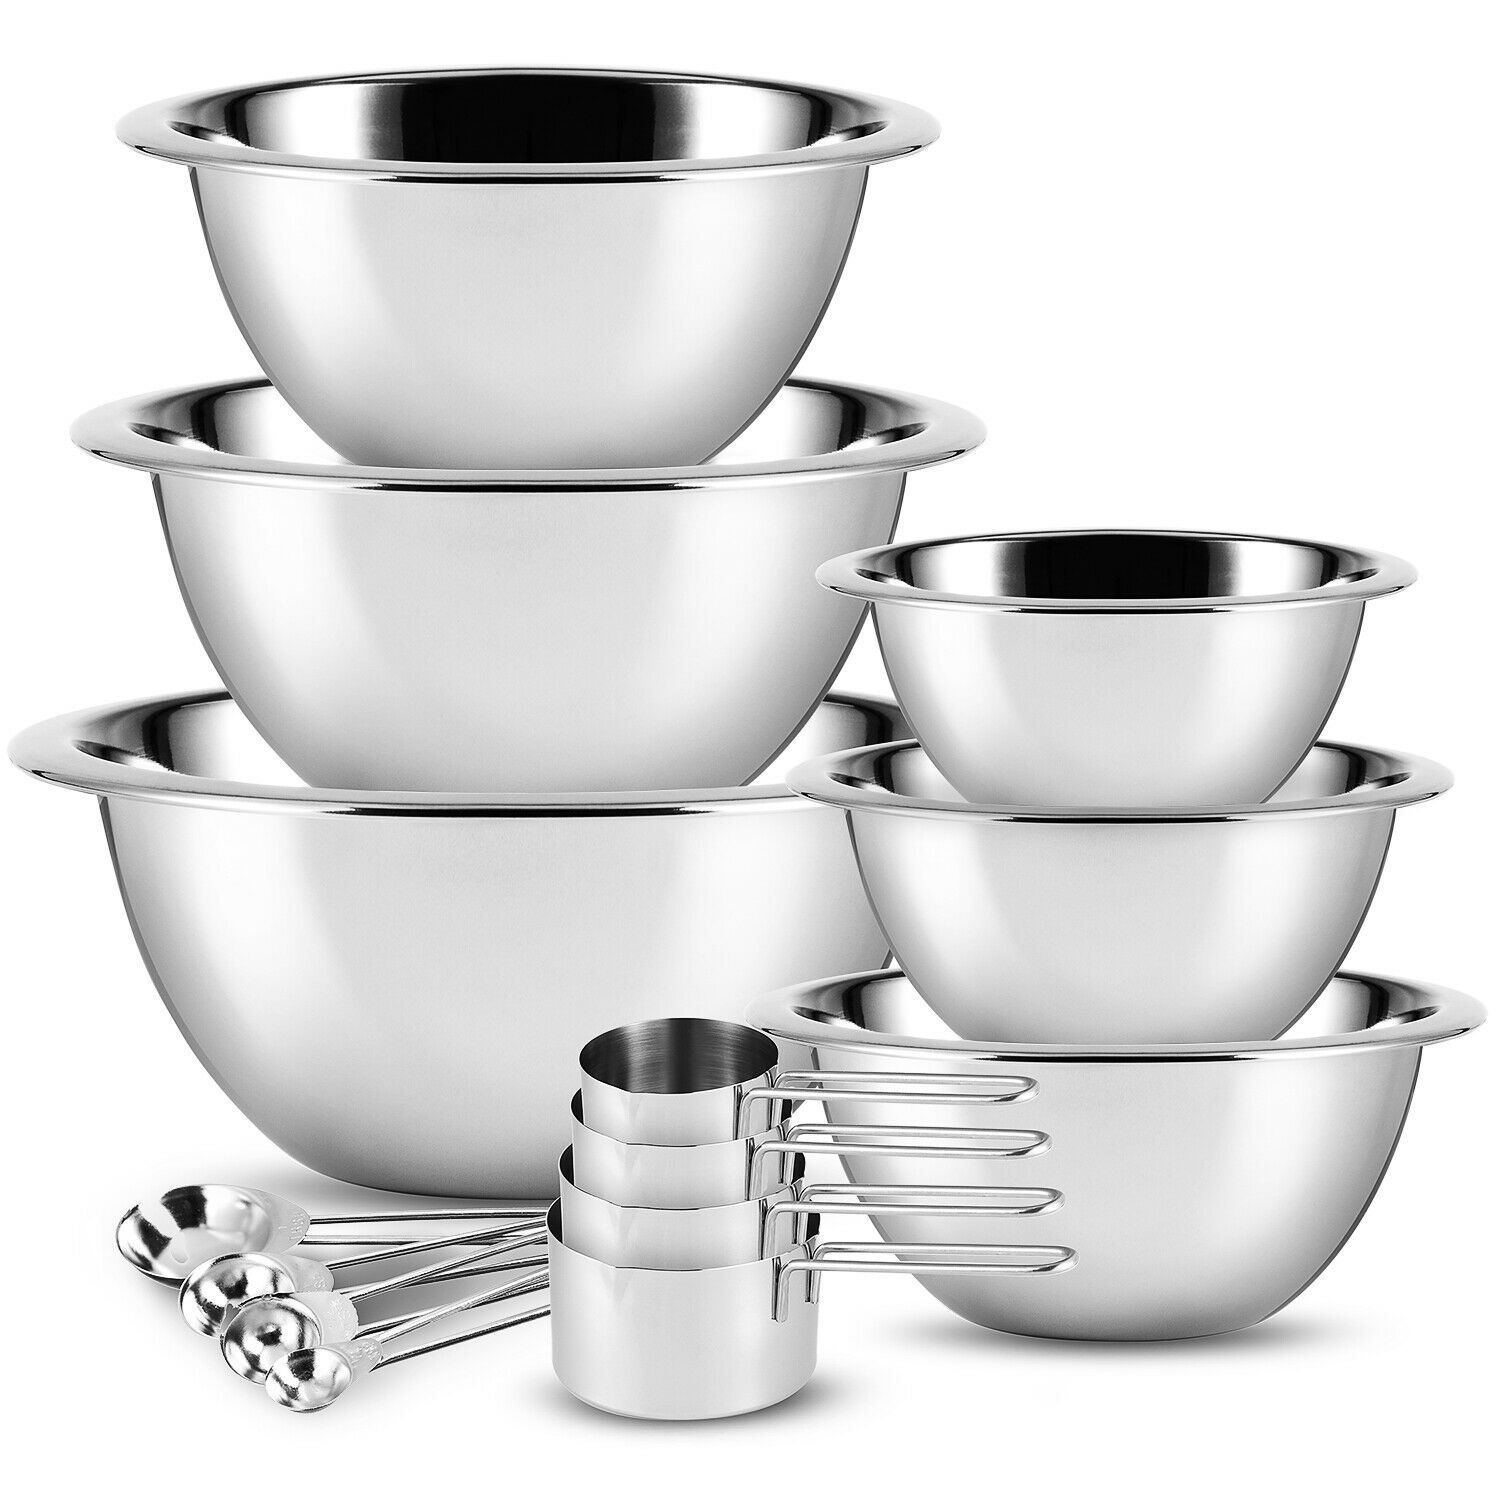 Image 1 - Stainless Steel Mixing Bowls 14 Piece Bowl Set with Measuring Cups and Spoons